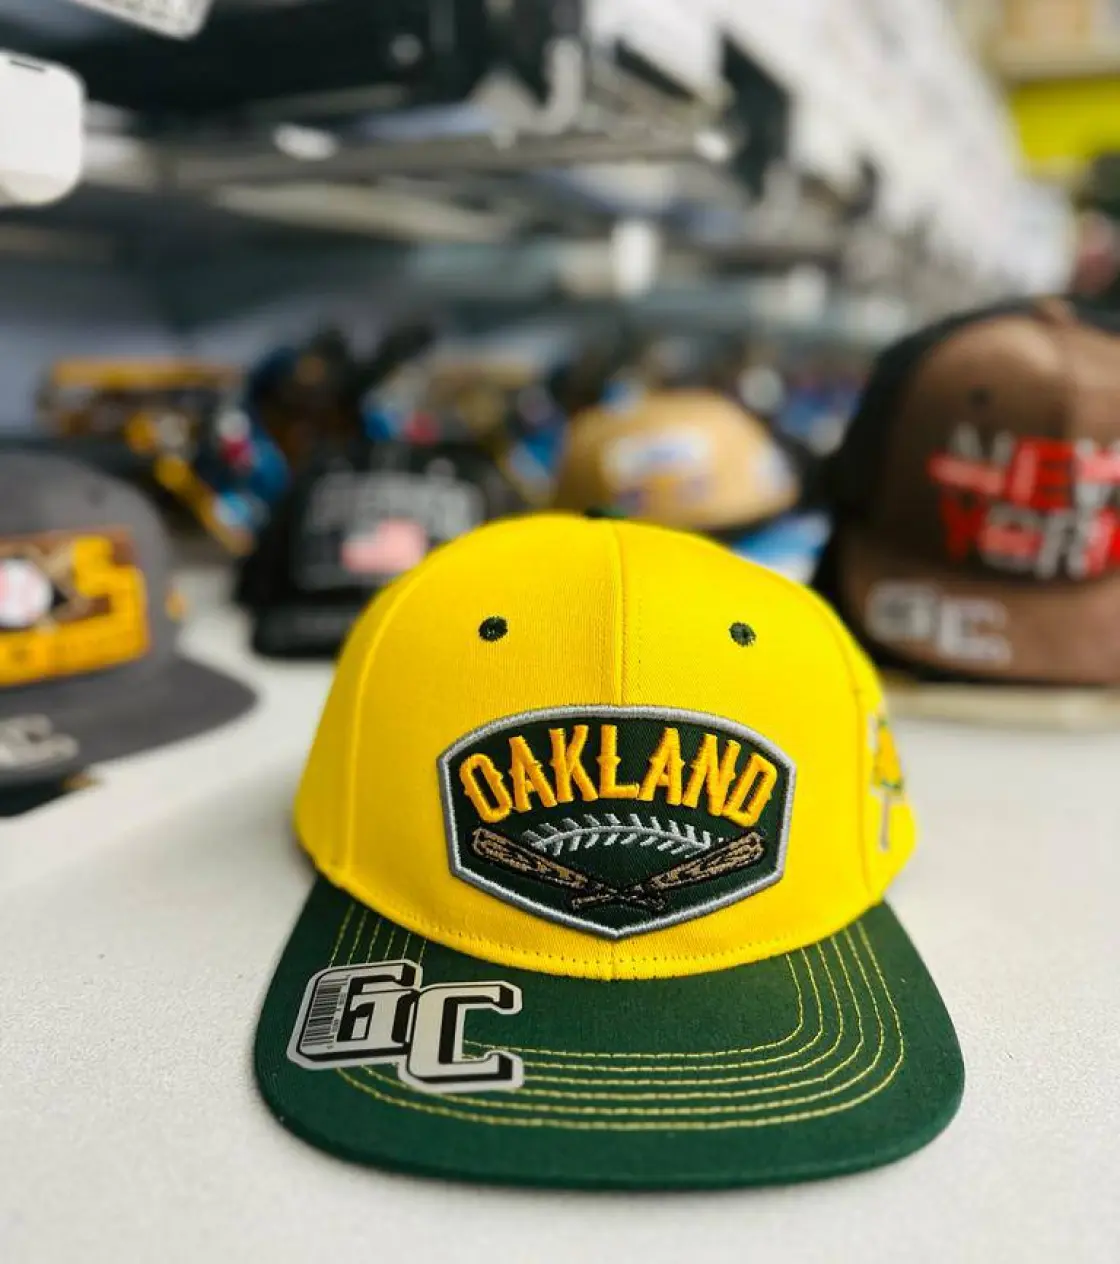 Yellow hat with Oakland embroidery